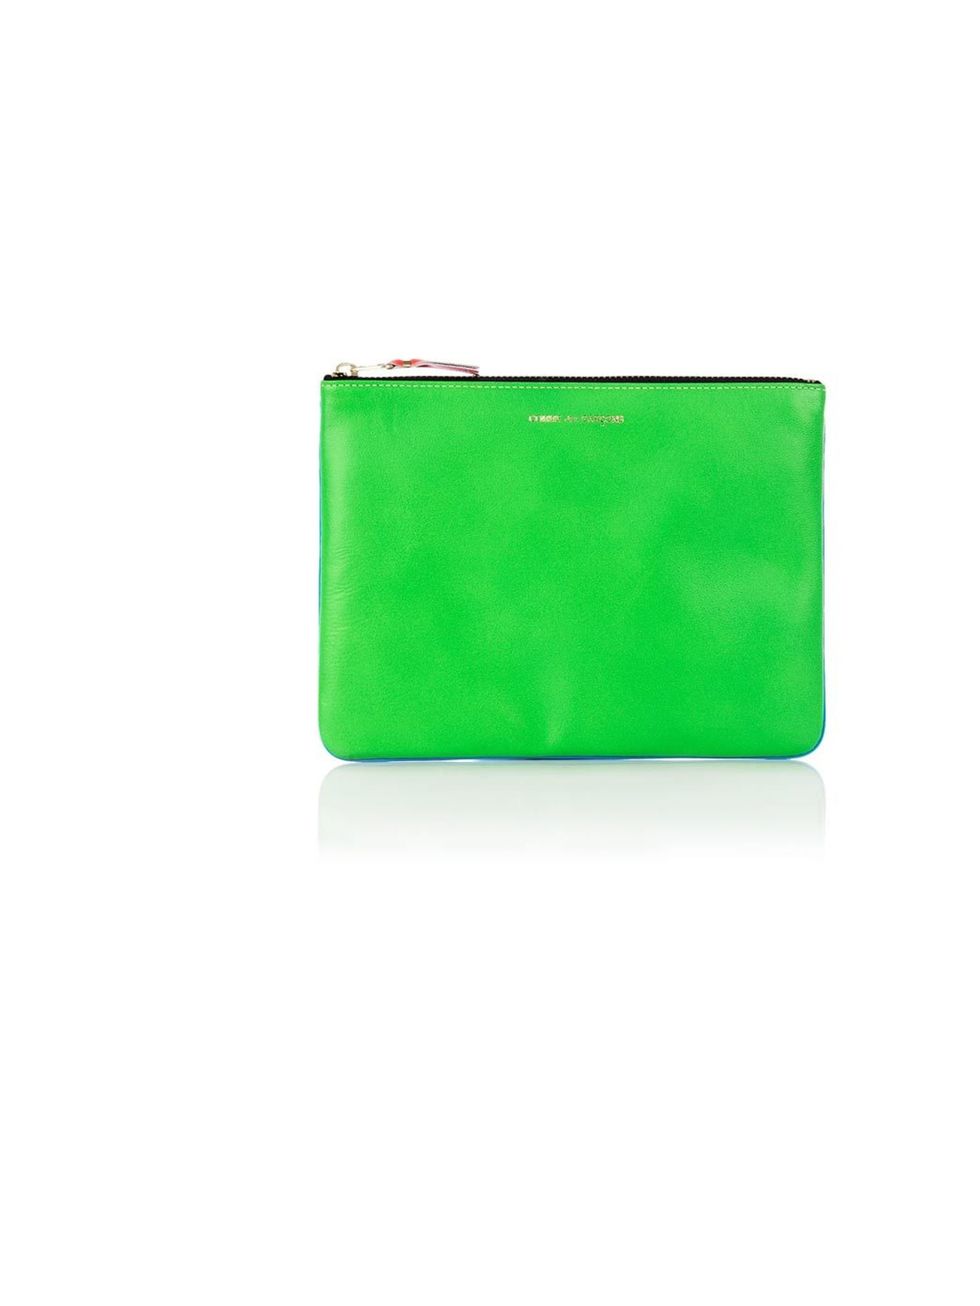 <p>Comme des Garcons super fluro leather pouch, £94, at <a href="http://www.my-wardrobe.com/">my-wardrobe.com</a></p>